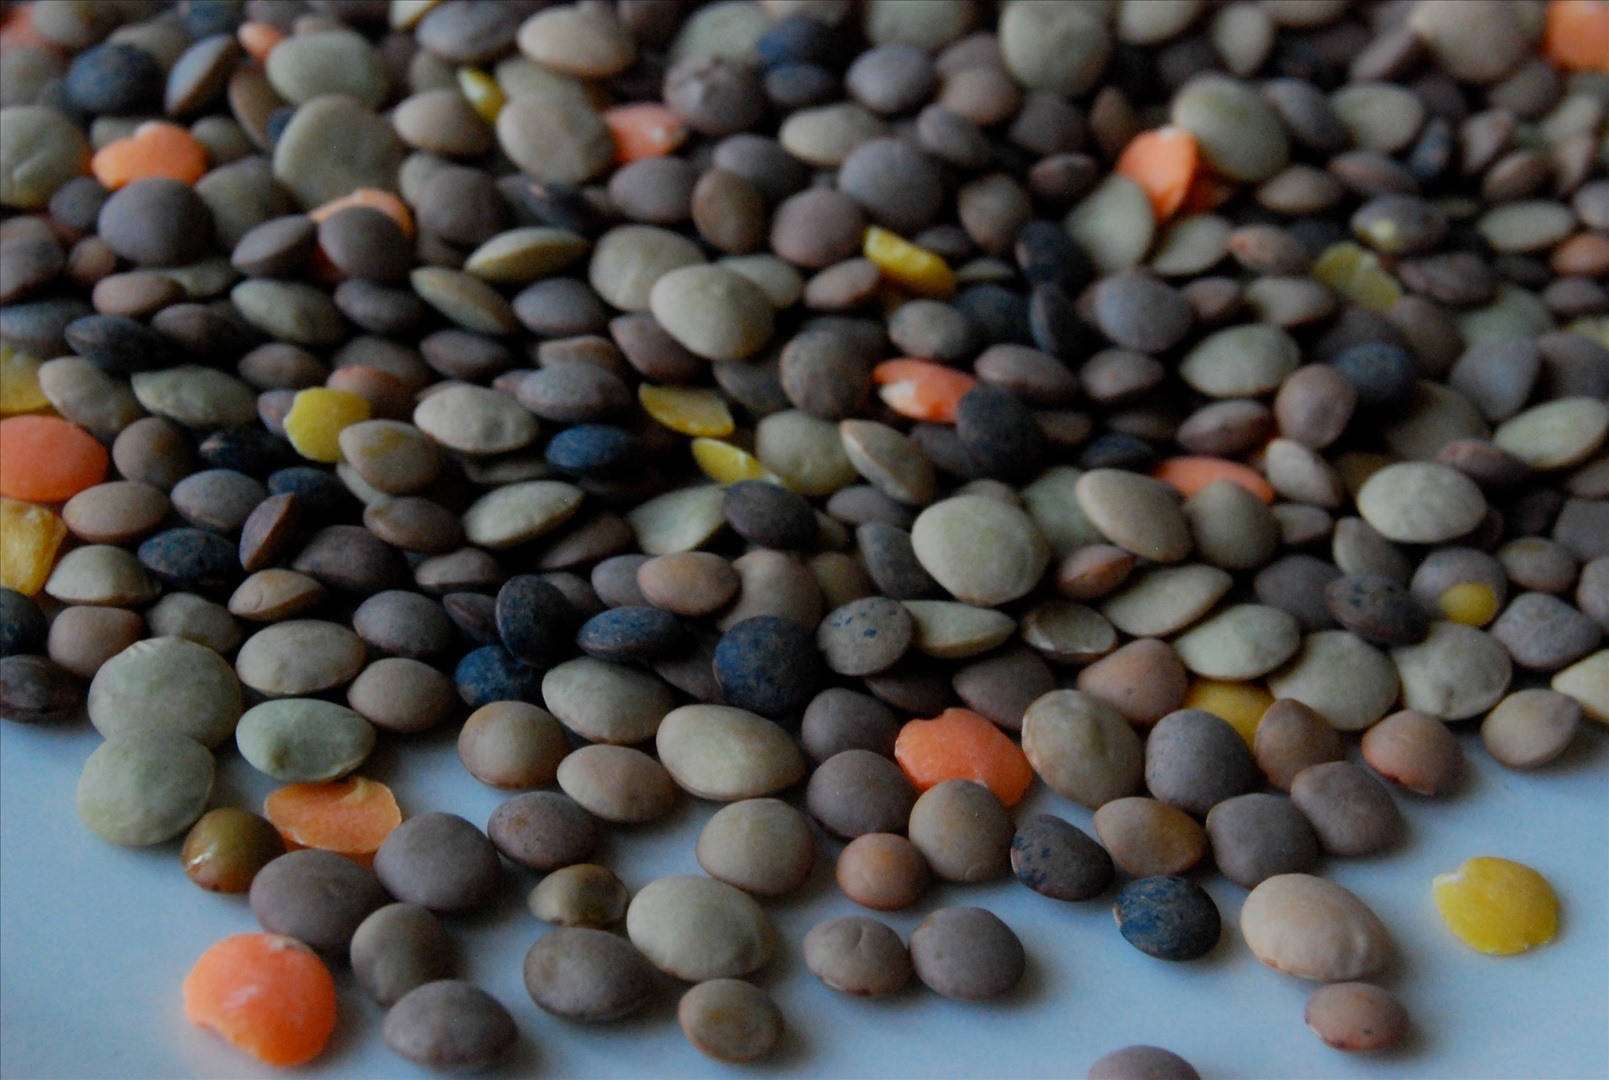 Colorful Lentils Displayed on a Sky Blue Surface Wallpaper